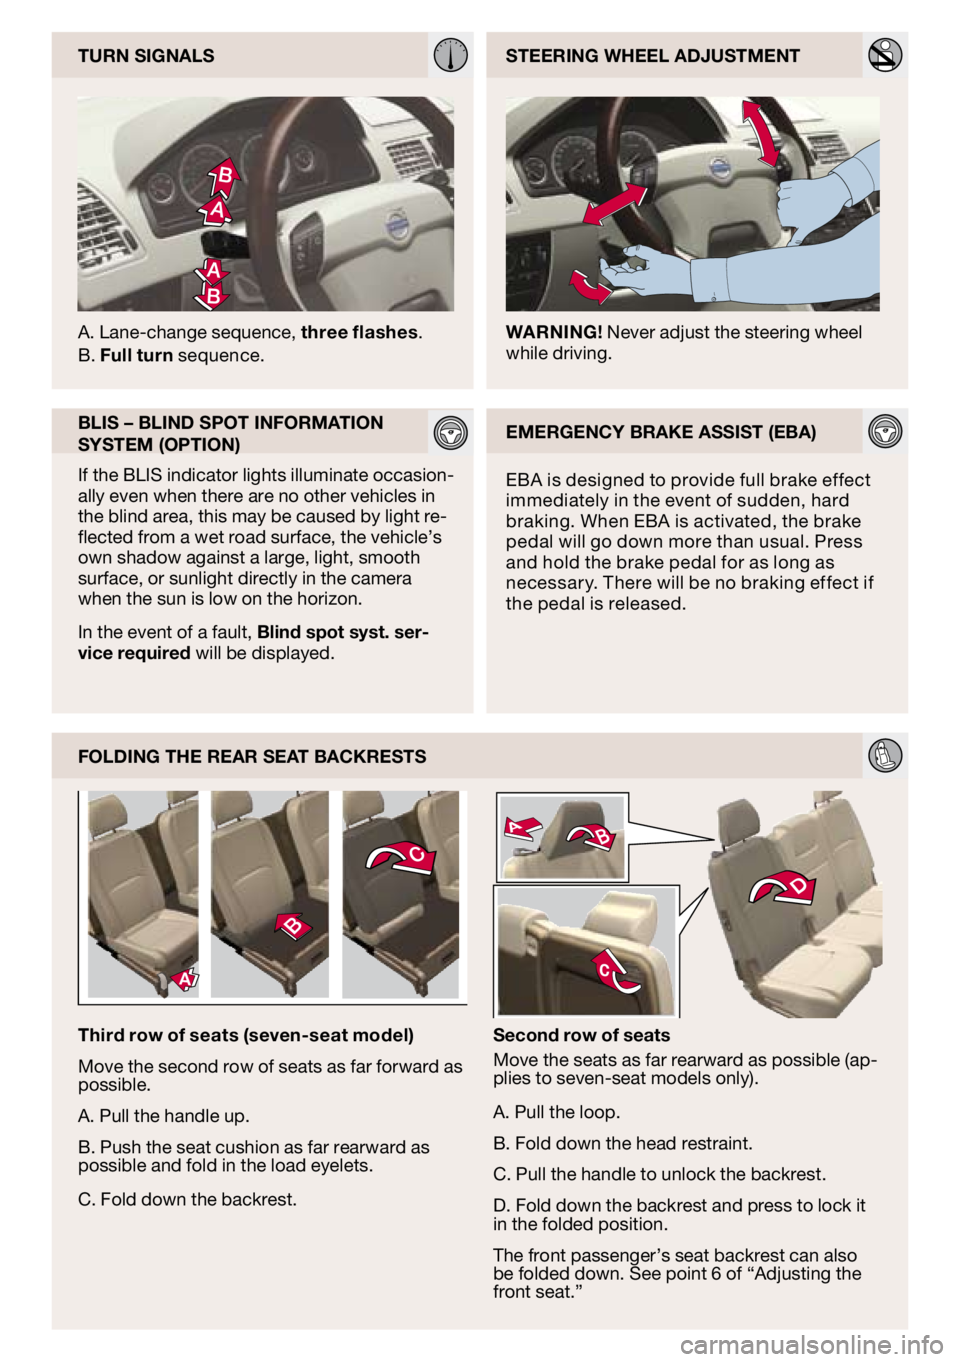 VOLVO XC90 2009  Quick Guide 
FOldIng THe ReAR SeAT bAckReSTS
Third row of seats (seven-seat model)
Move the second row of seats as far forward as possible.
A. Pull the handle up.
B. Push the seat cushion as far rearward as possi